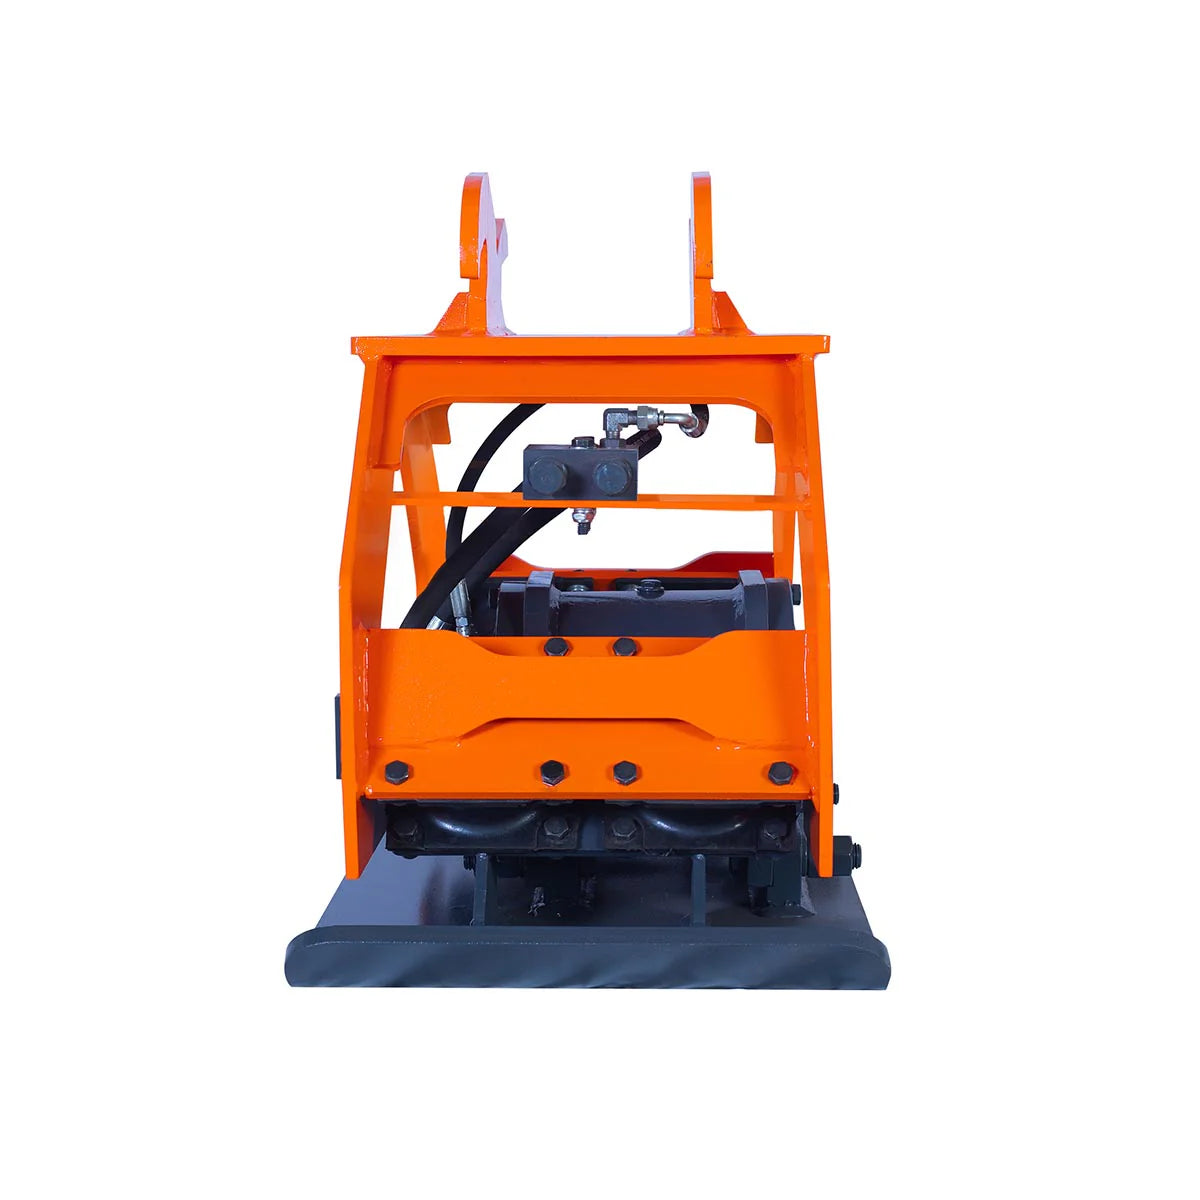 New Premium 8,800-lb Hydraulic Plate Compactor, 2-4 Ton Excavator Weight, 19” Compact Capacity